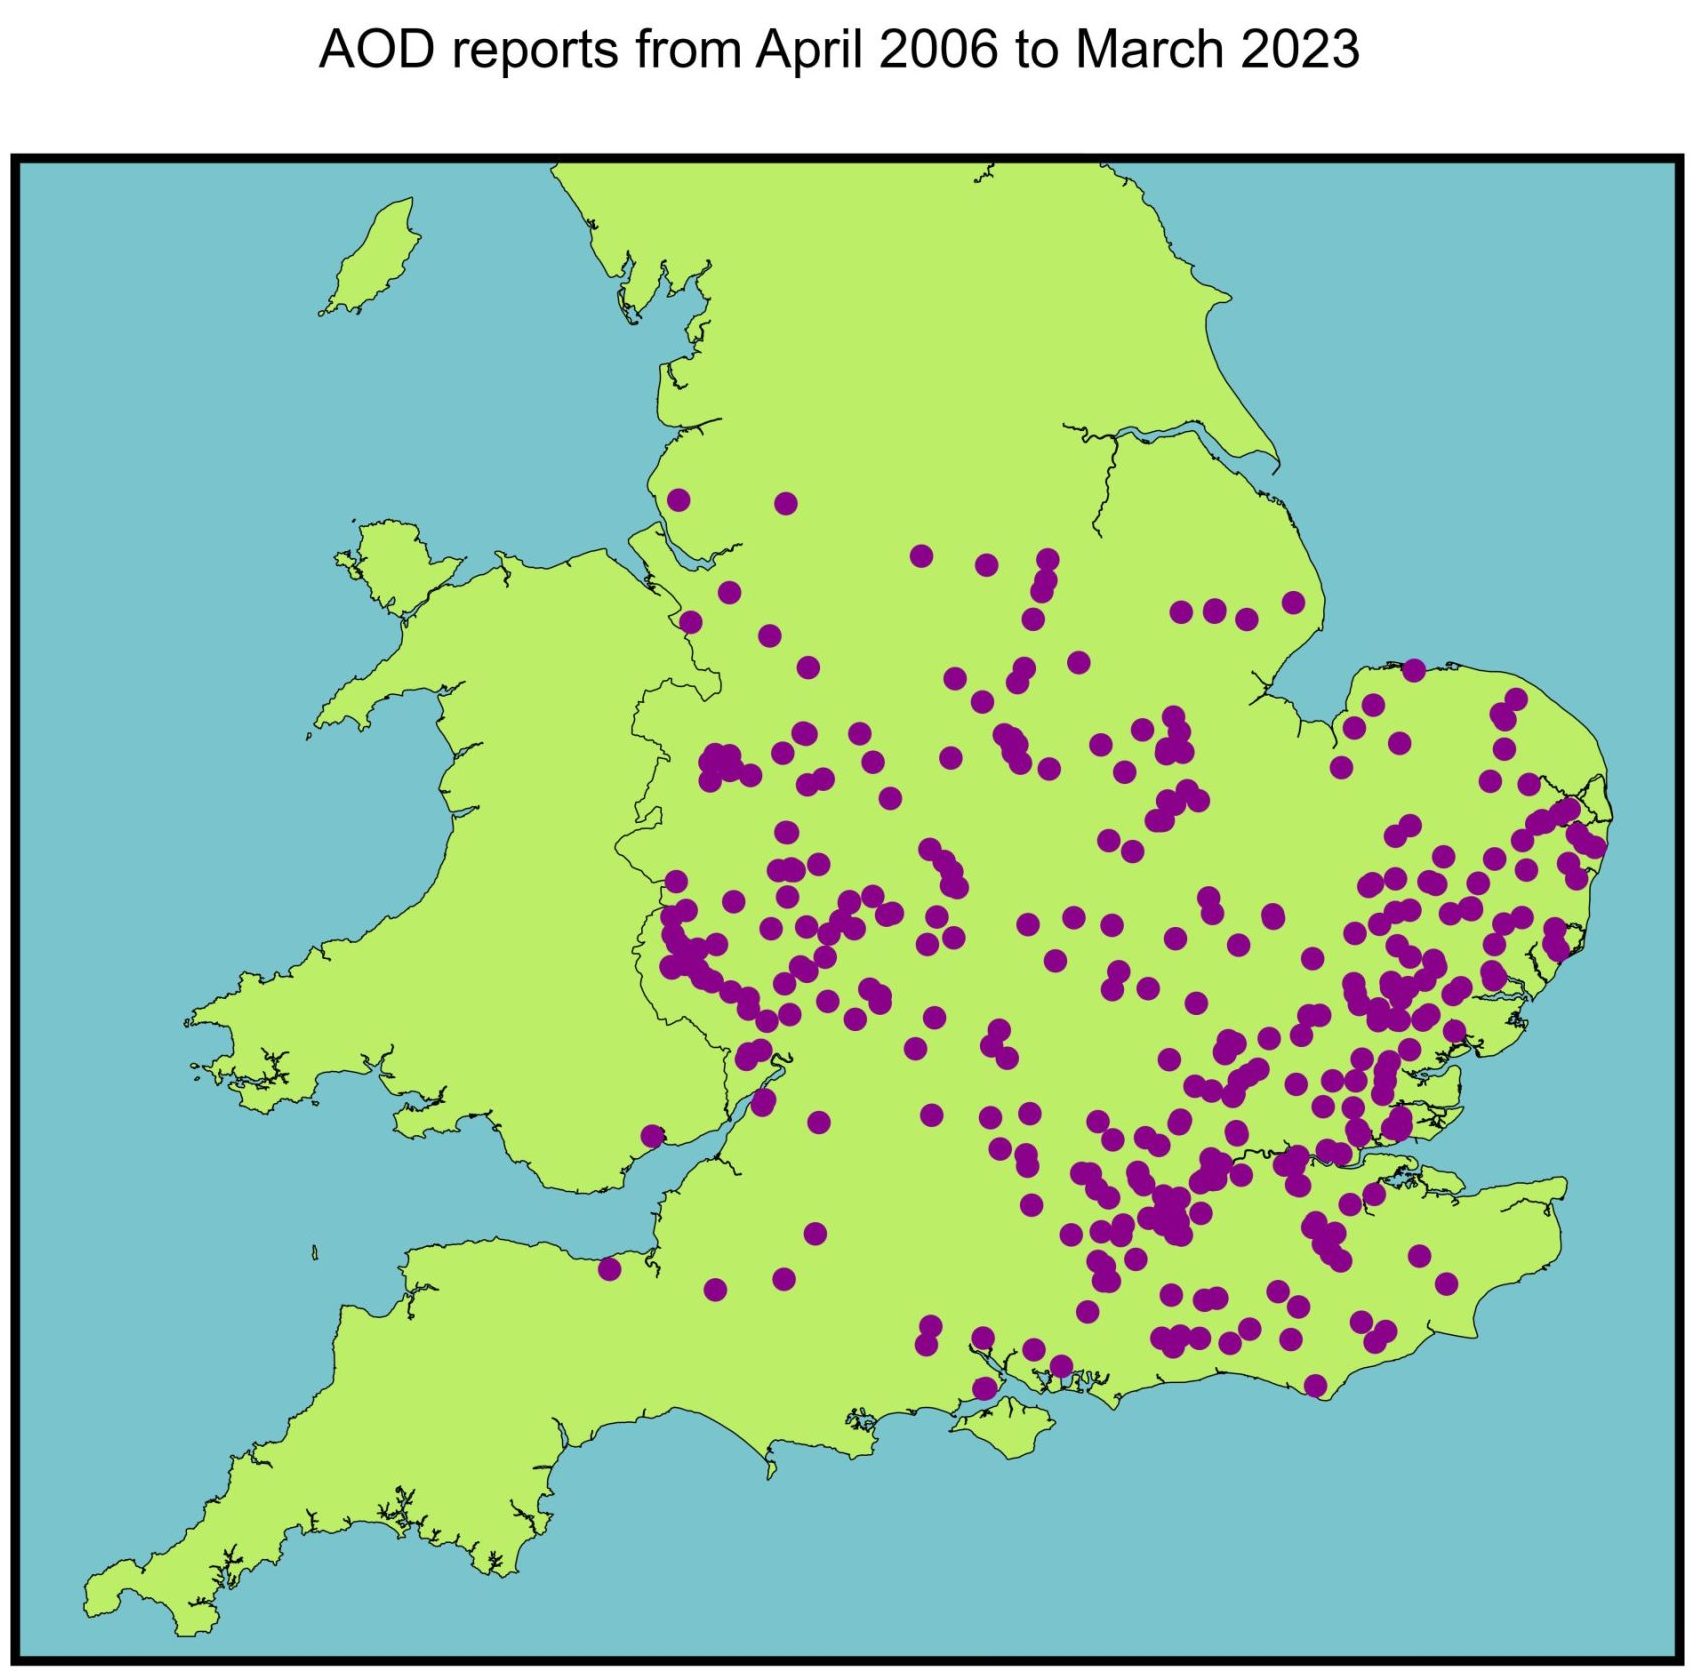 The map displays AOD locations of occurrence from 2006 to March 2023.